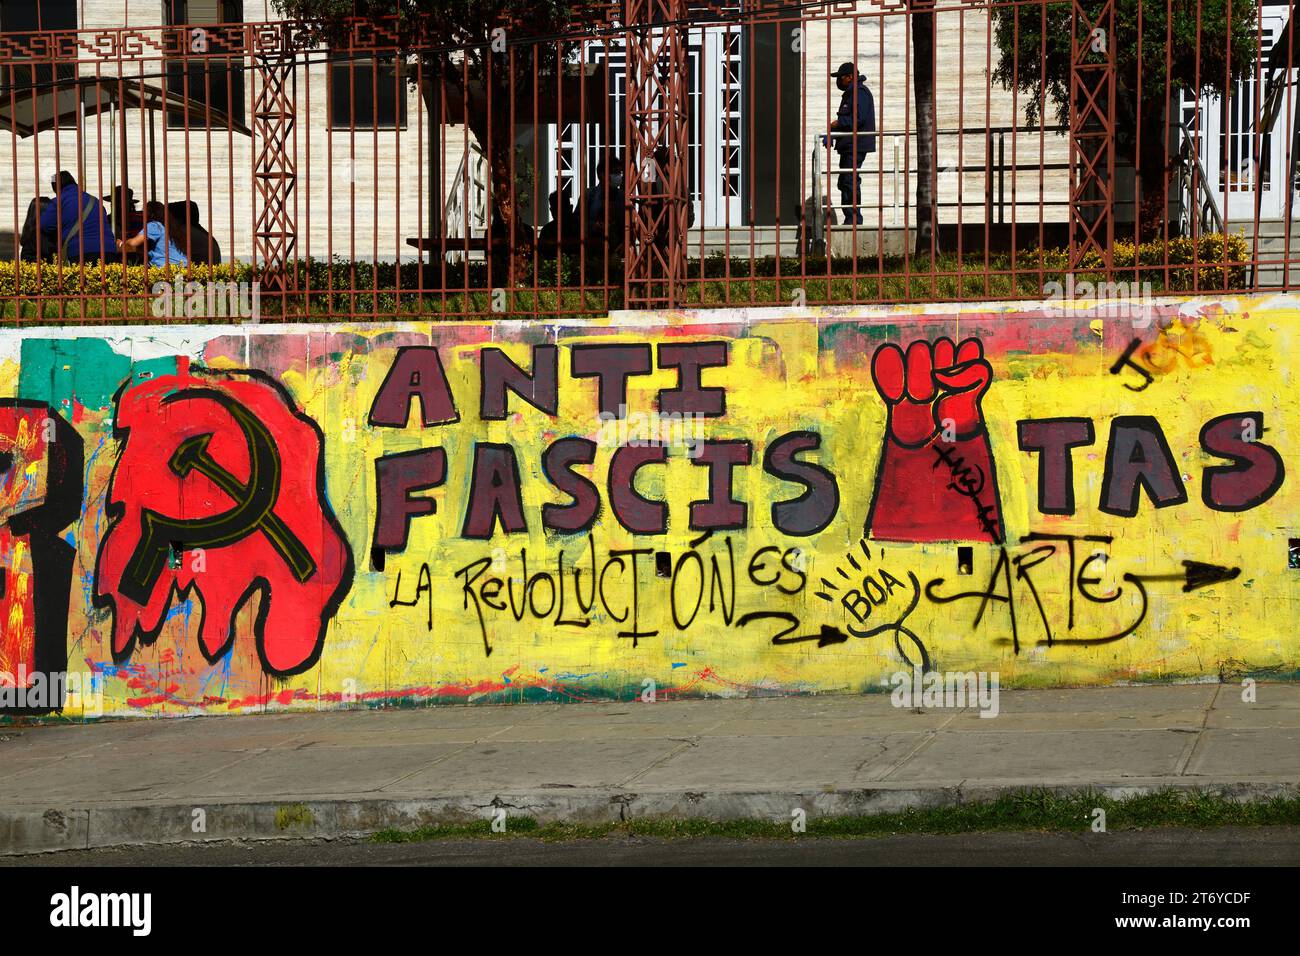 An anti fascists mural by the Bolivian Communist Party near the main UMSA university in central La Paz, Bolivia Stock Photo